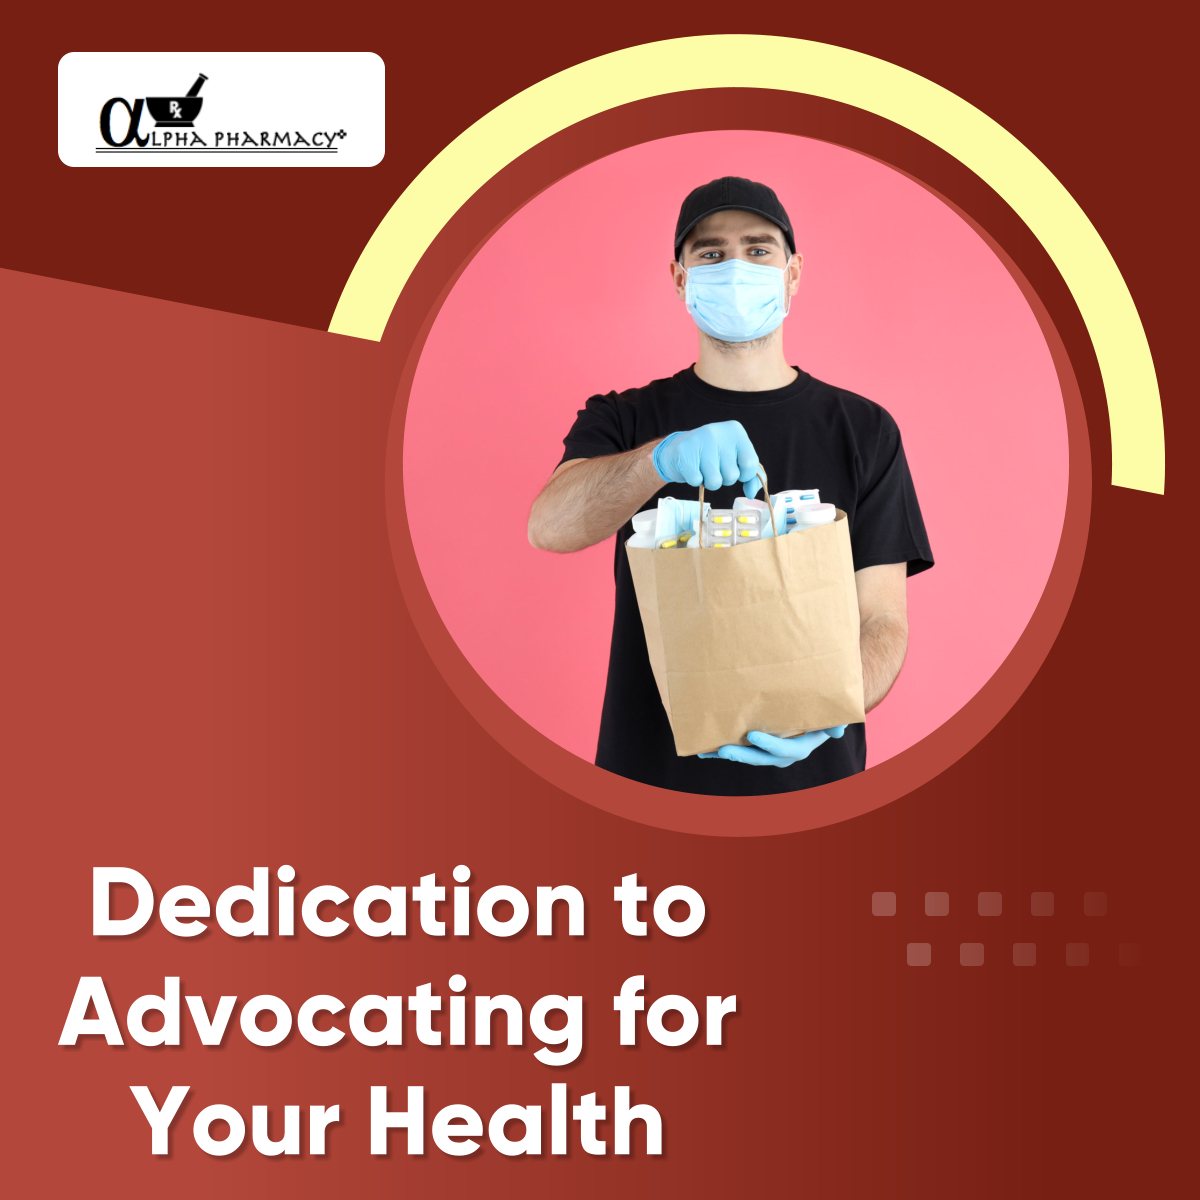 We don’t just stop being health advocates when transacting with our customers. We see to it that the healthcare products we dispense reach those who need them,...

Read more:
facebook.com/alphapharmacyb…

#BaltimoreMD #Pharmacy #HealthAdvocates #Delivery #ContactUs